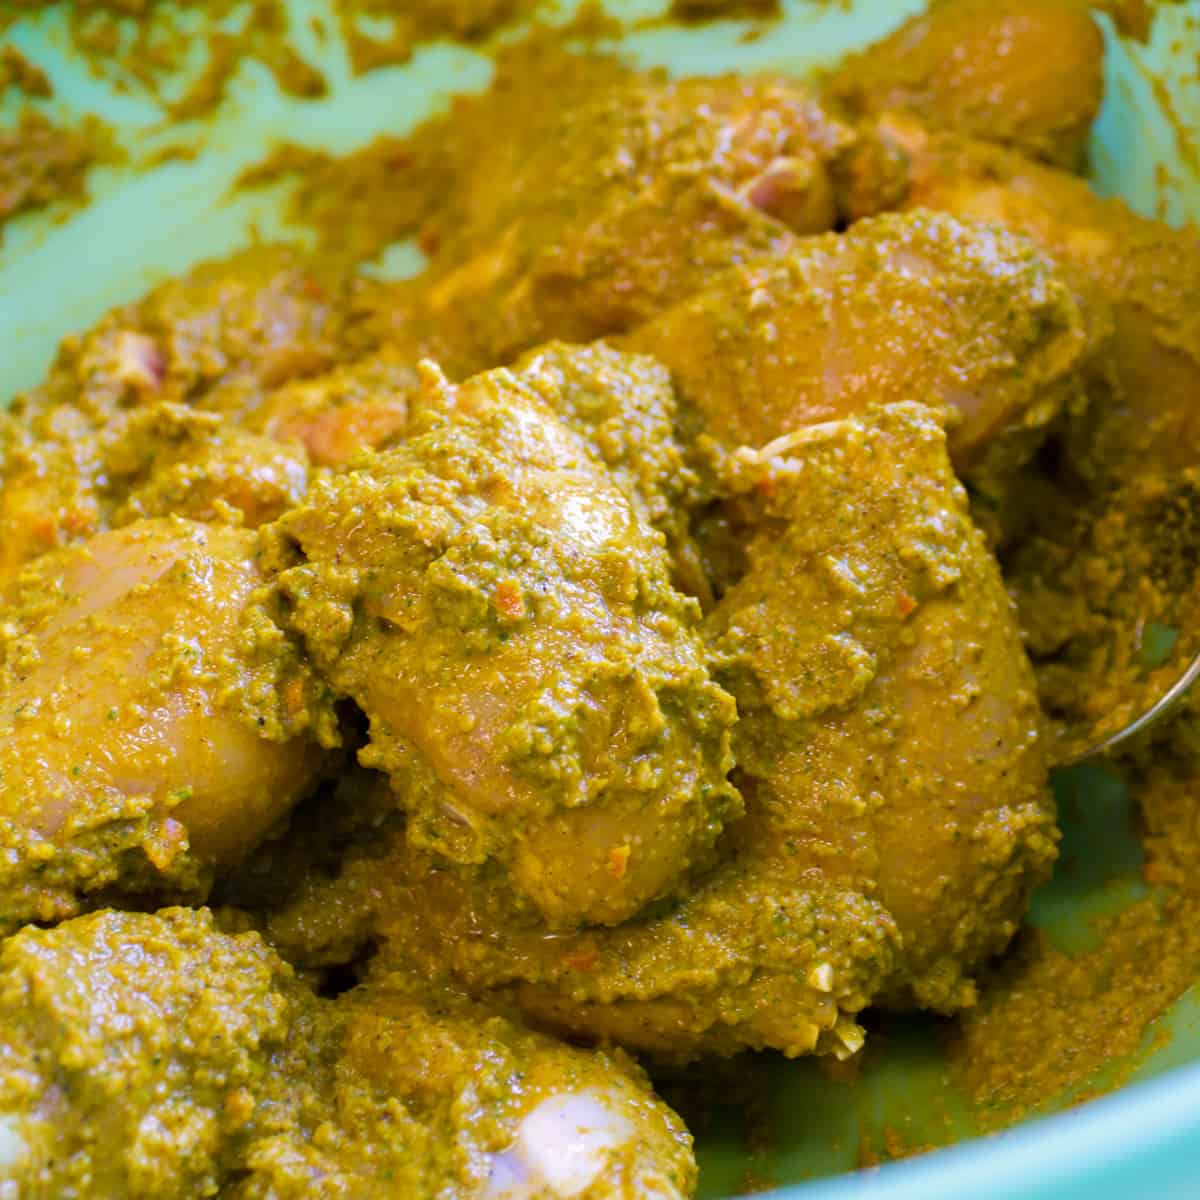 Chicken drumsticks tossed in the curry paste.